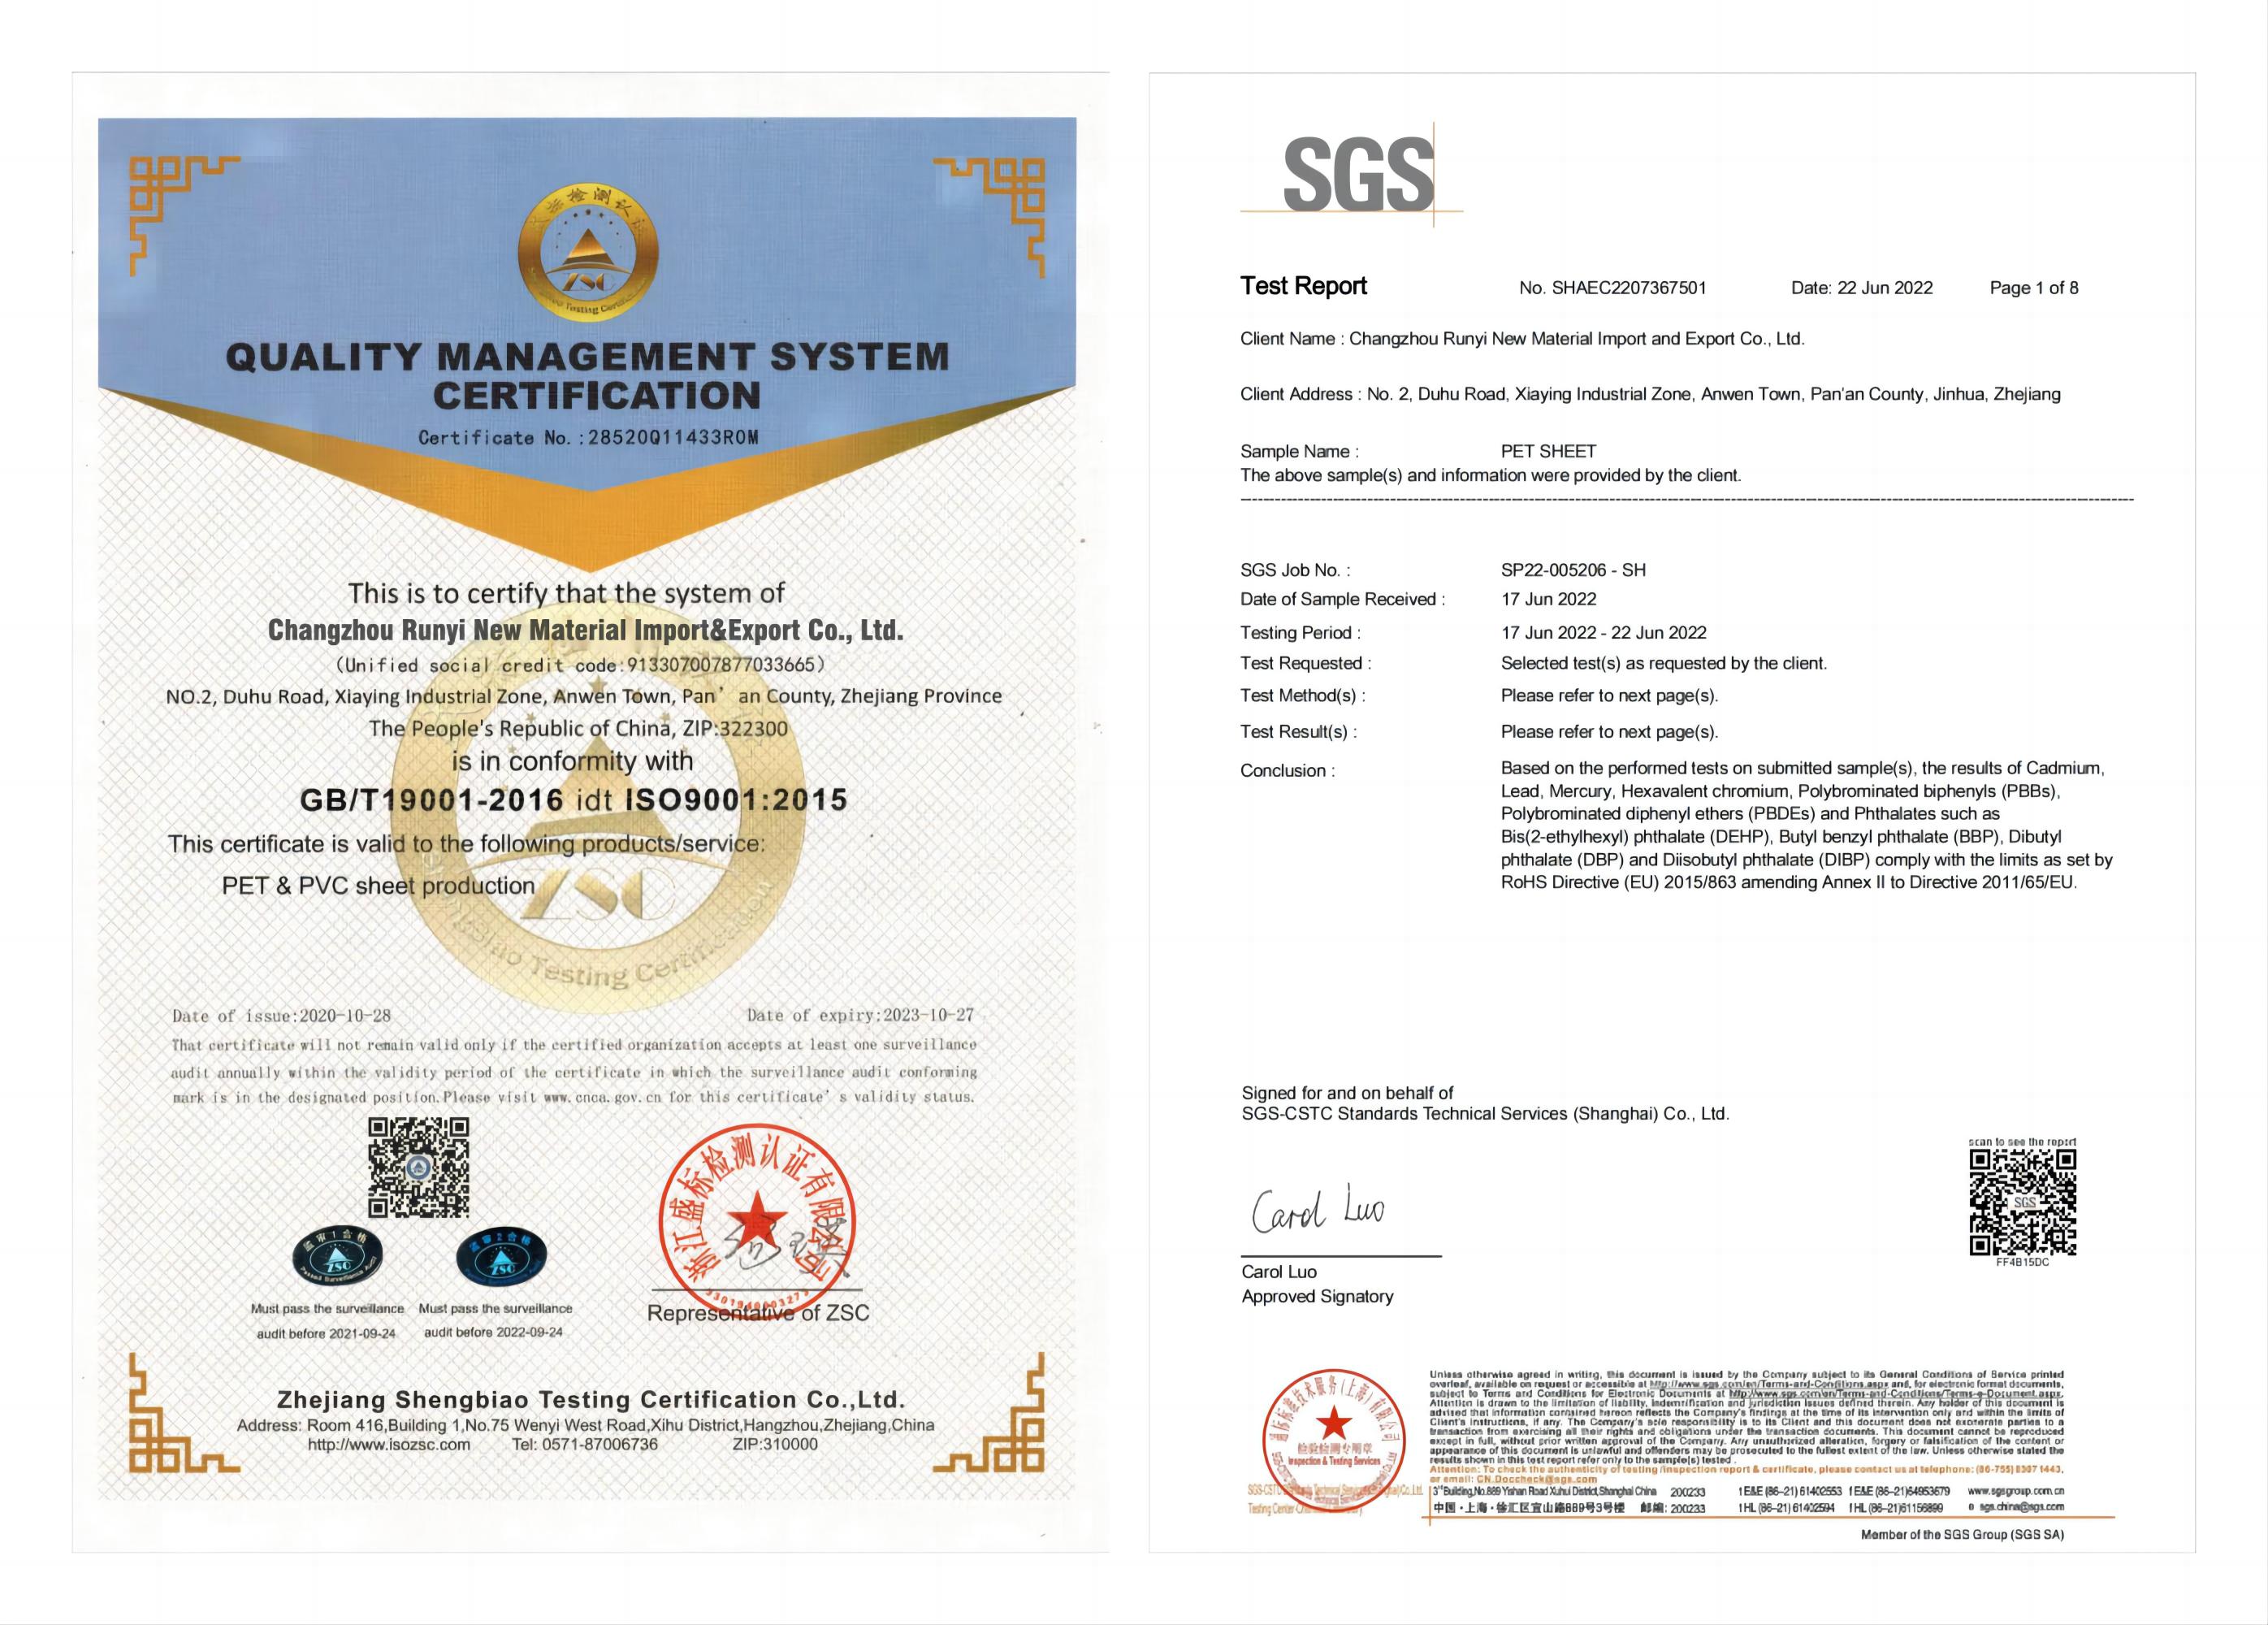 Our ISO certificate